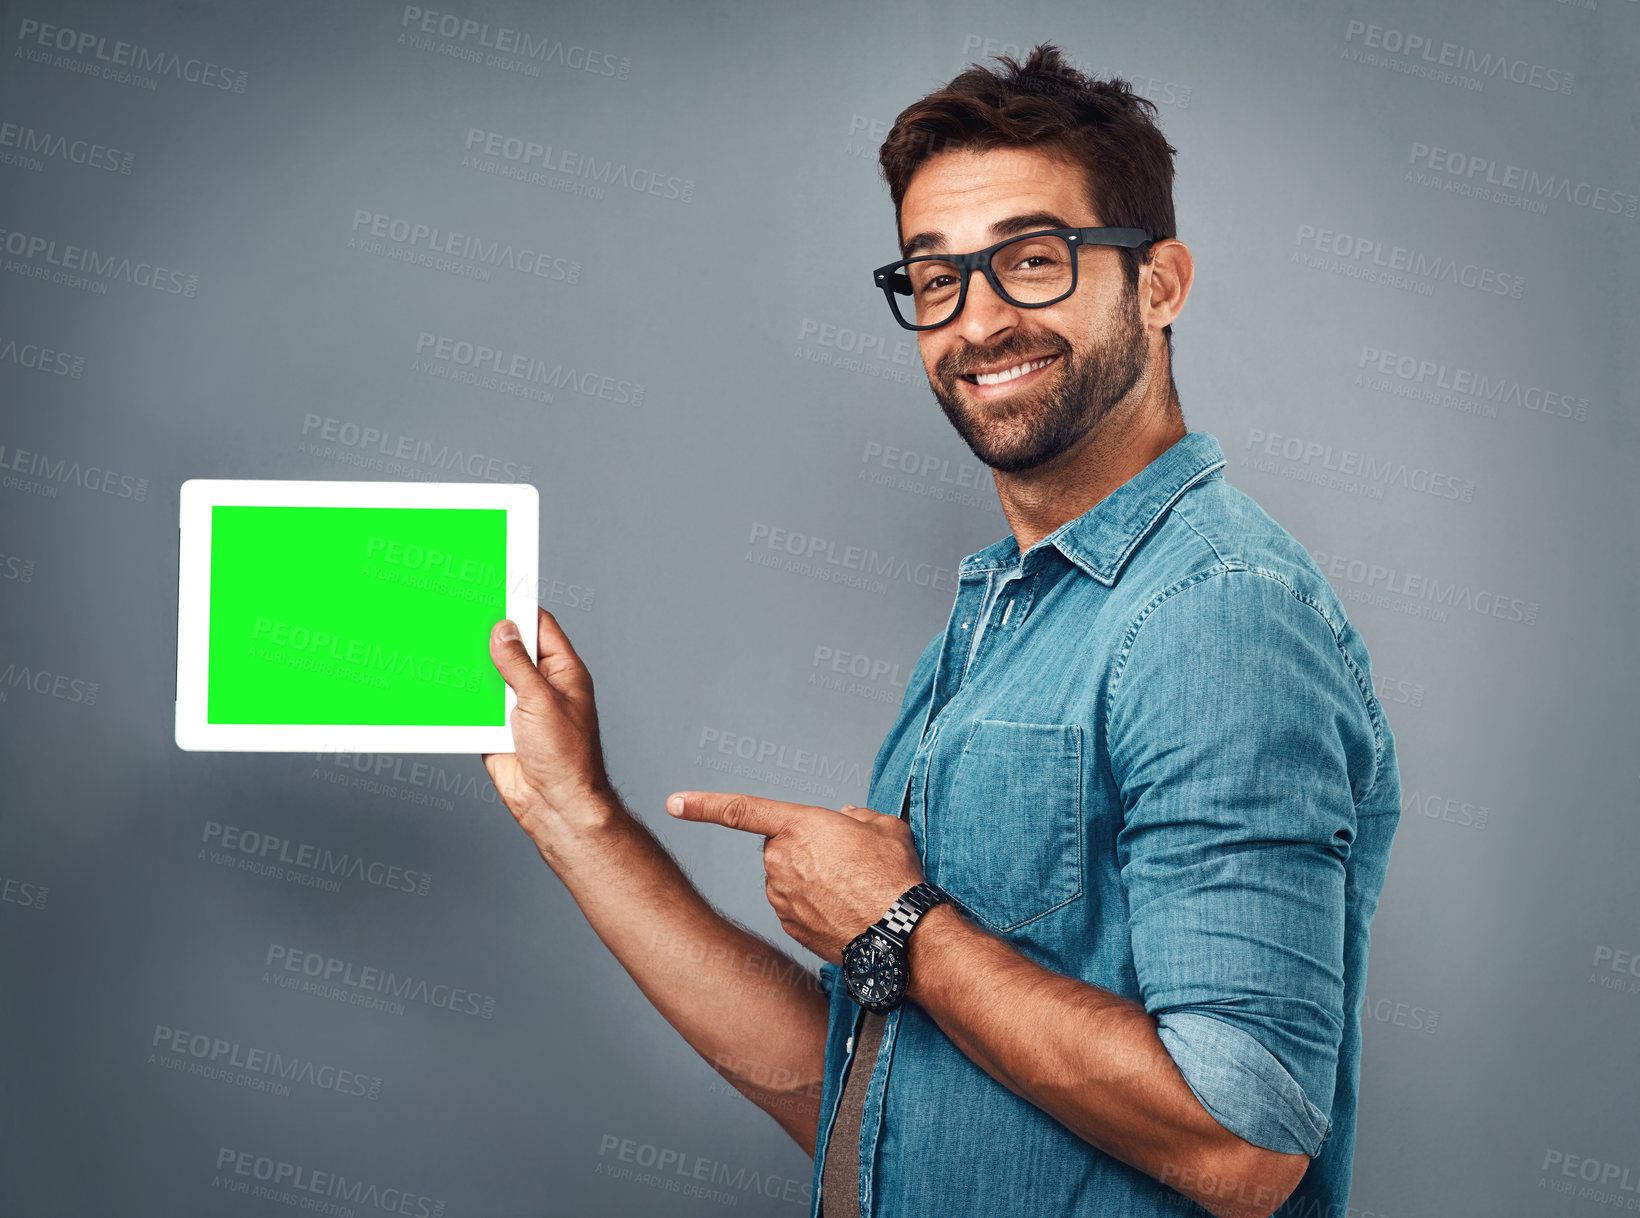 Buy stock photo Happy man, tablet and pointing to green screen for advertising against a grey studio background. Portrait of male person showing technology display, chromakey or mockup for copy space advertisement